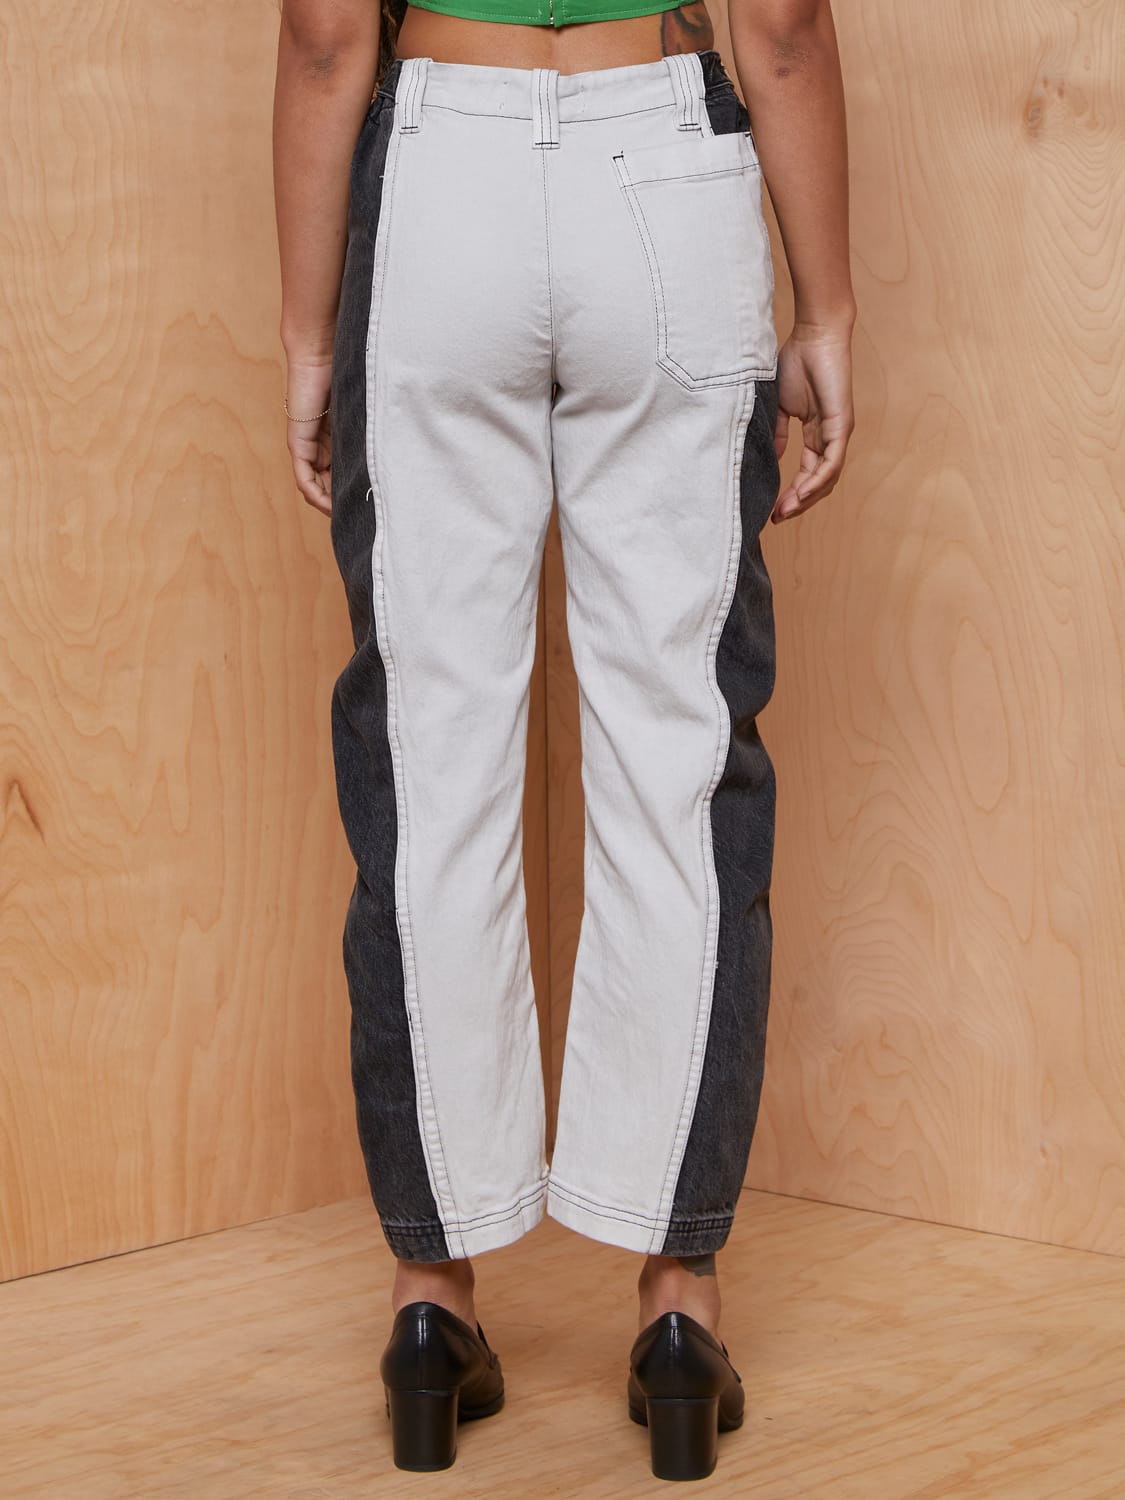 Rachel Comey Two Tone Jeans with Adjustable Waistband